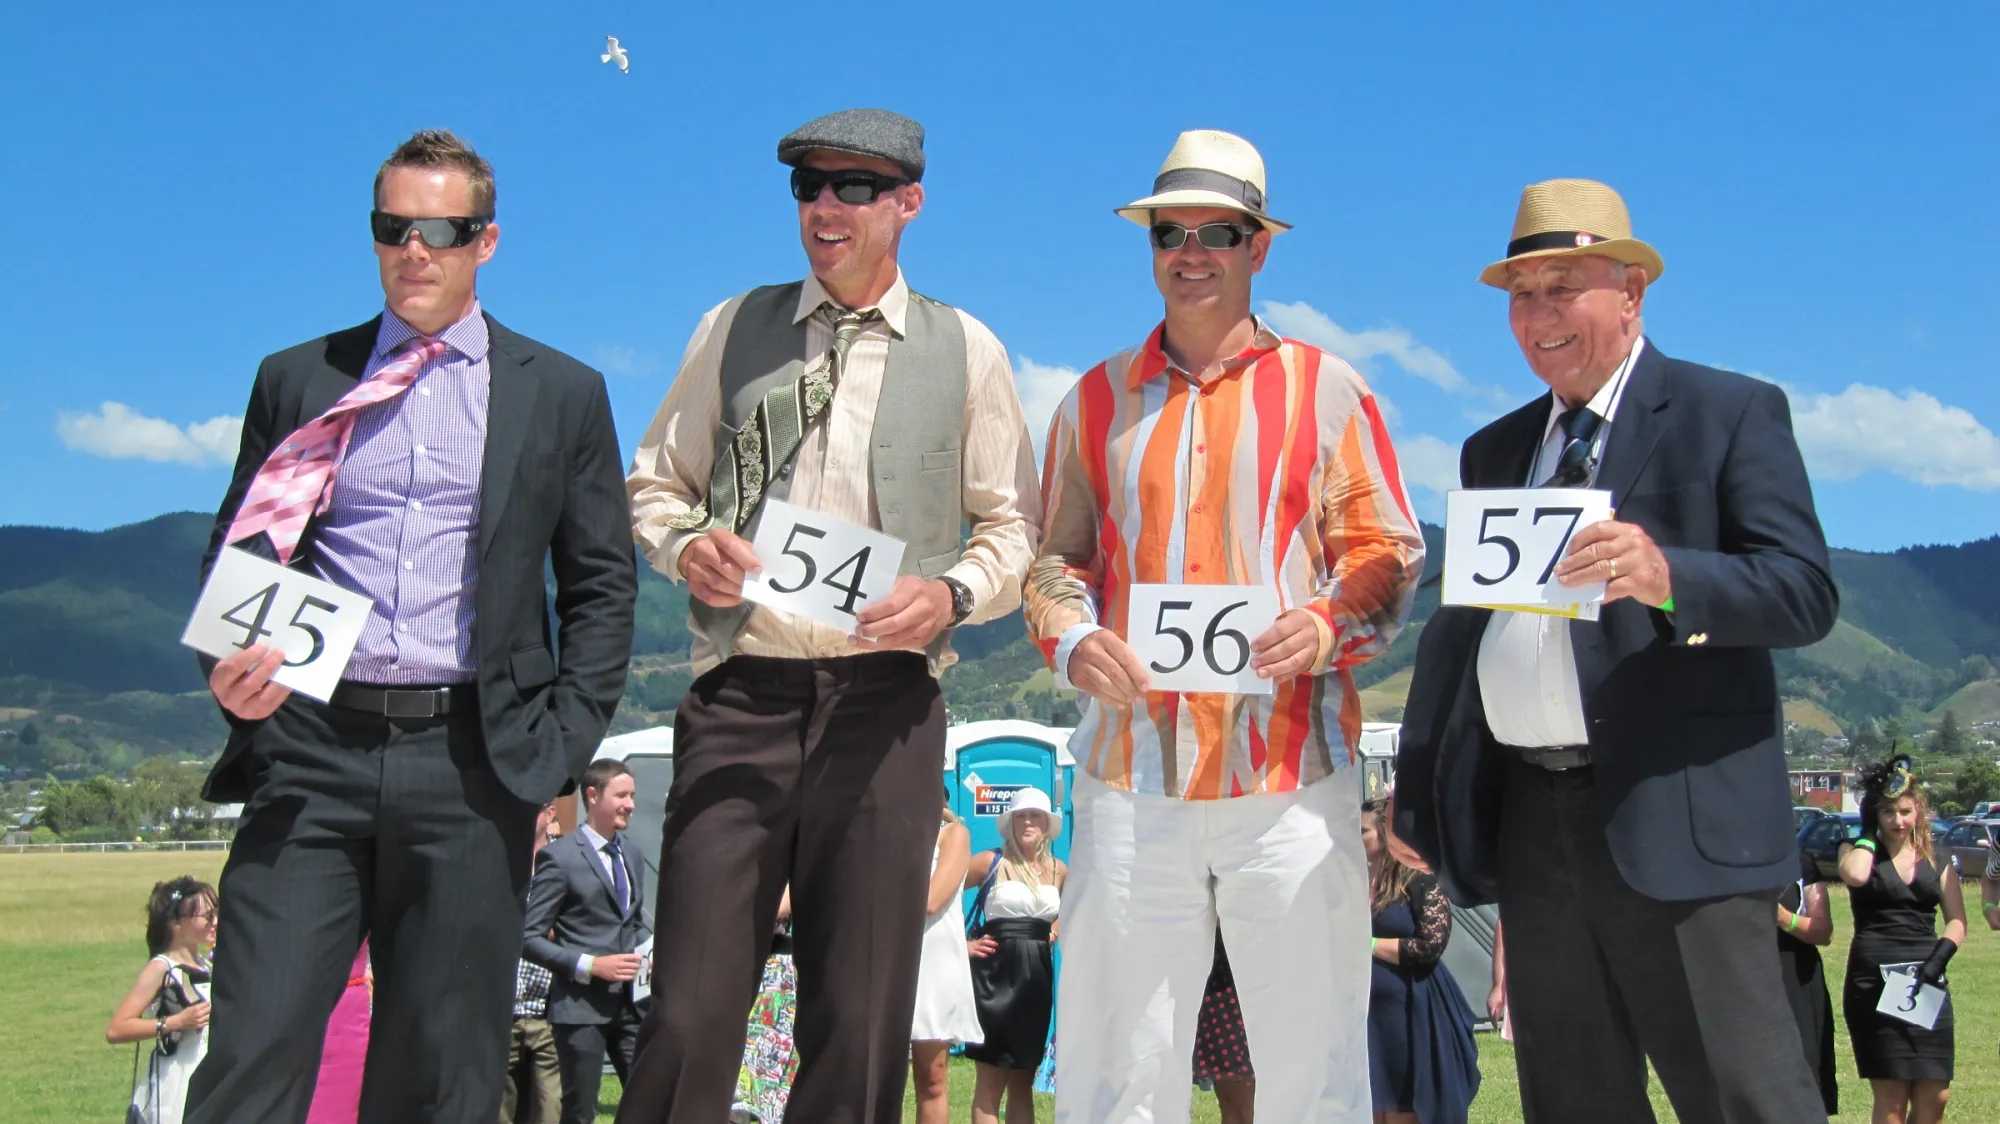 Best dressed men - Fashion in the field at Nelson harness races summer festival